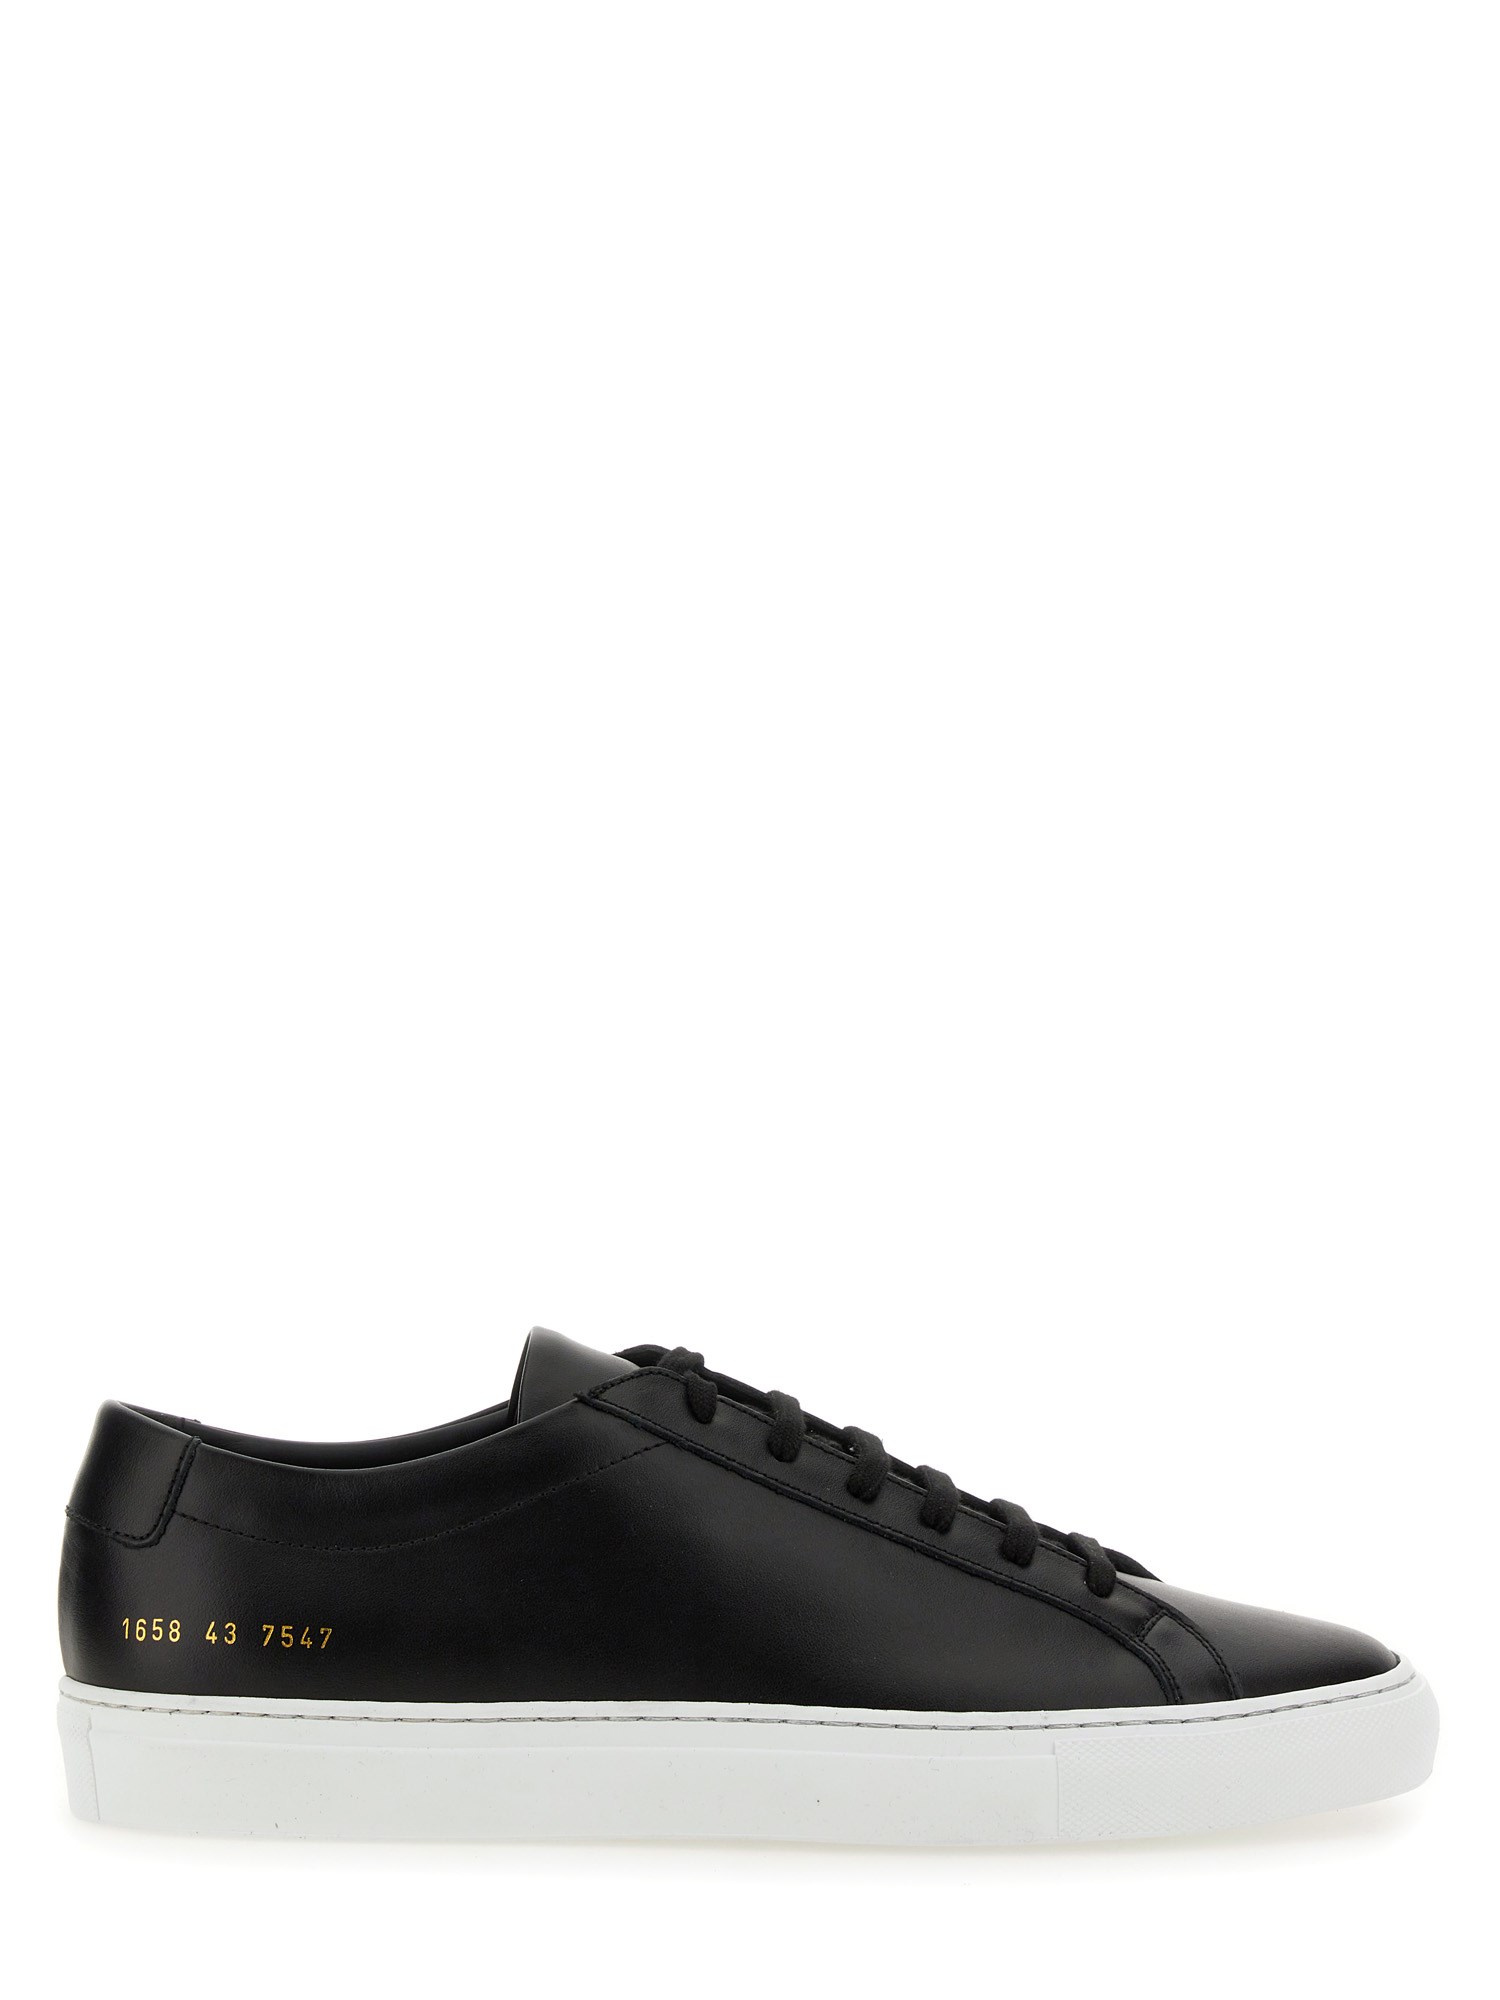 COMMON PROJECTS common projects low achilles sneaker